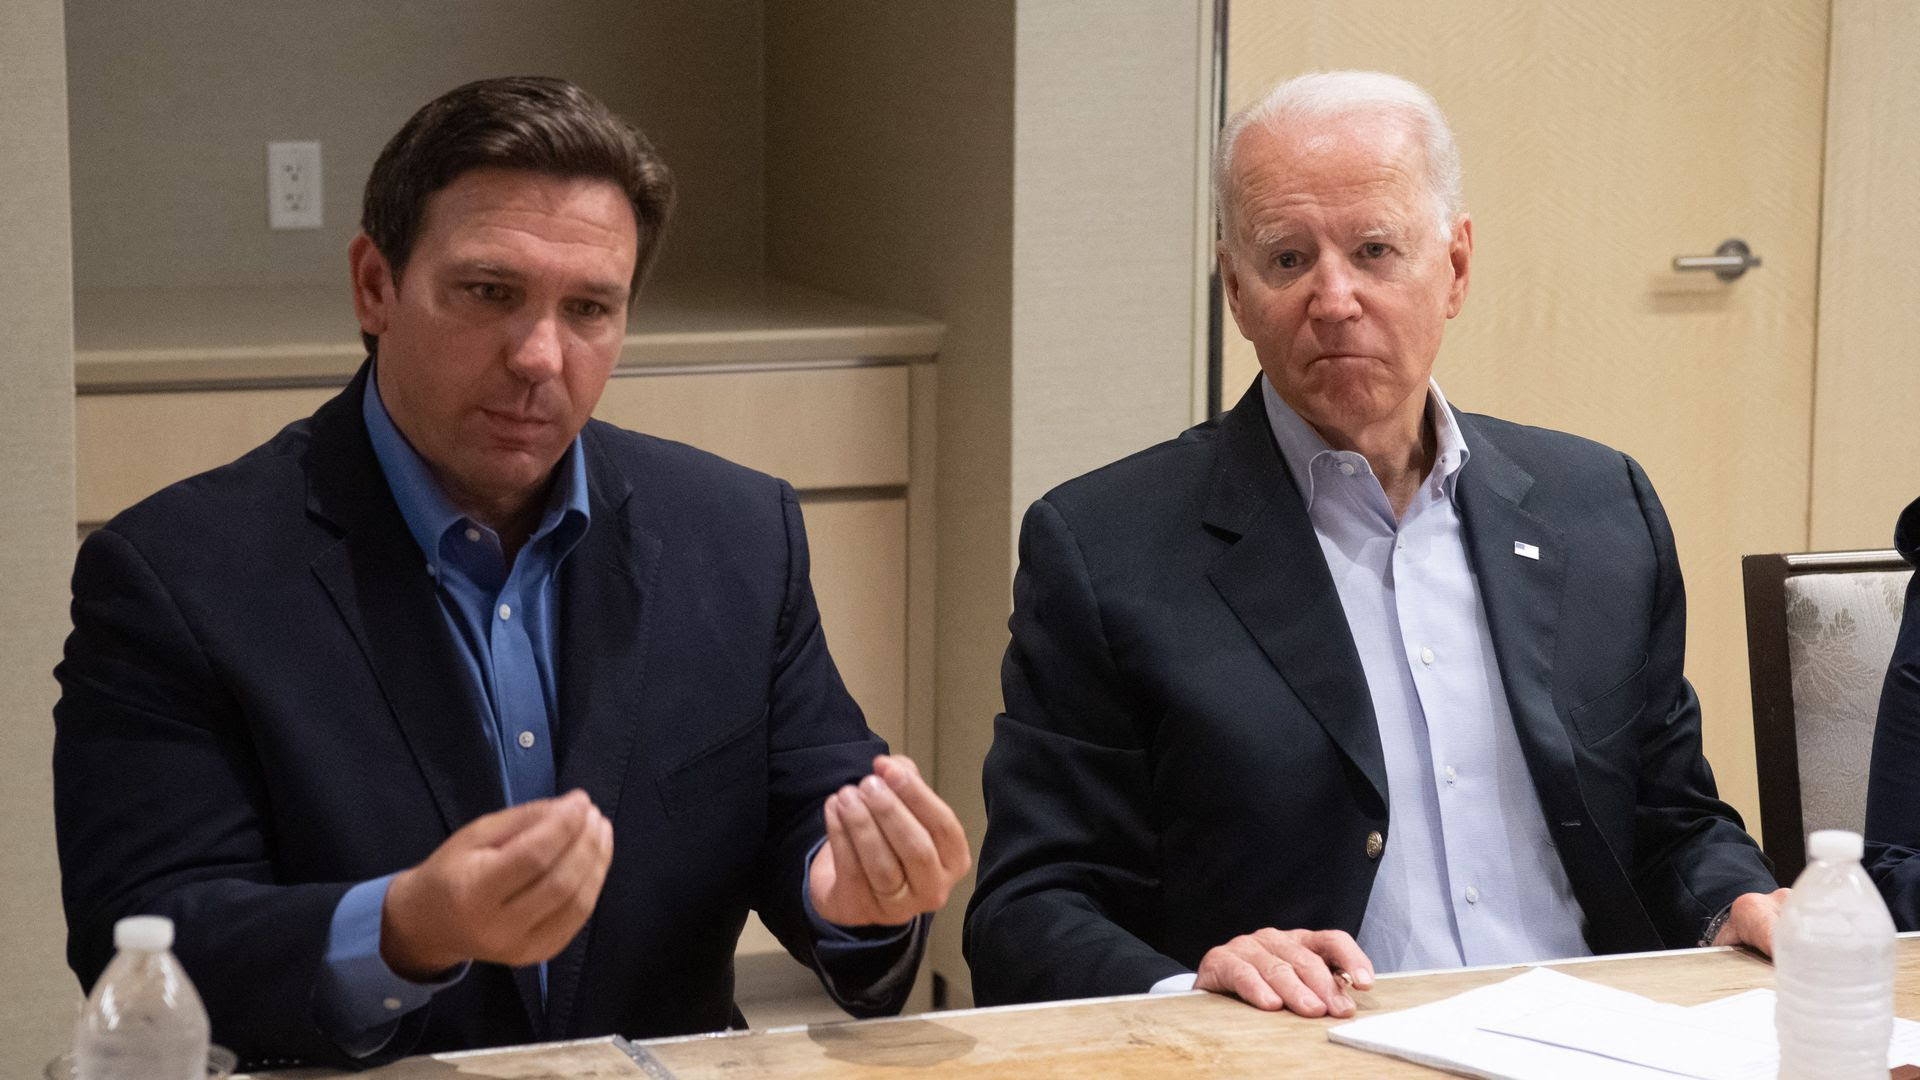 Why are Biden and DeSantis making jabs at each other in press conferences?